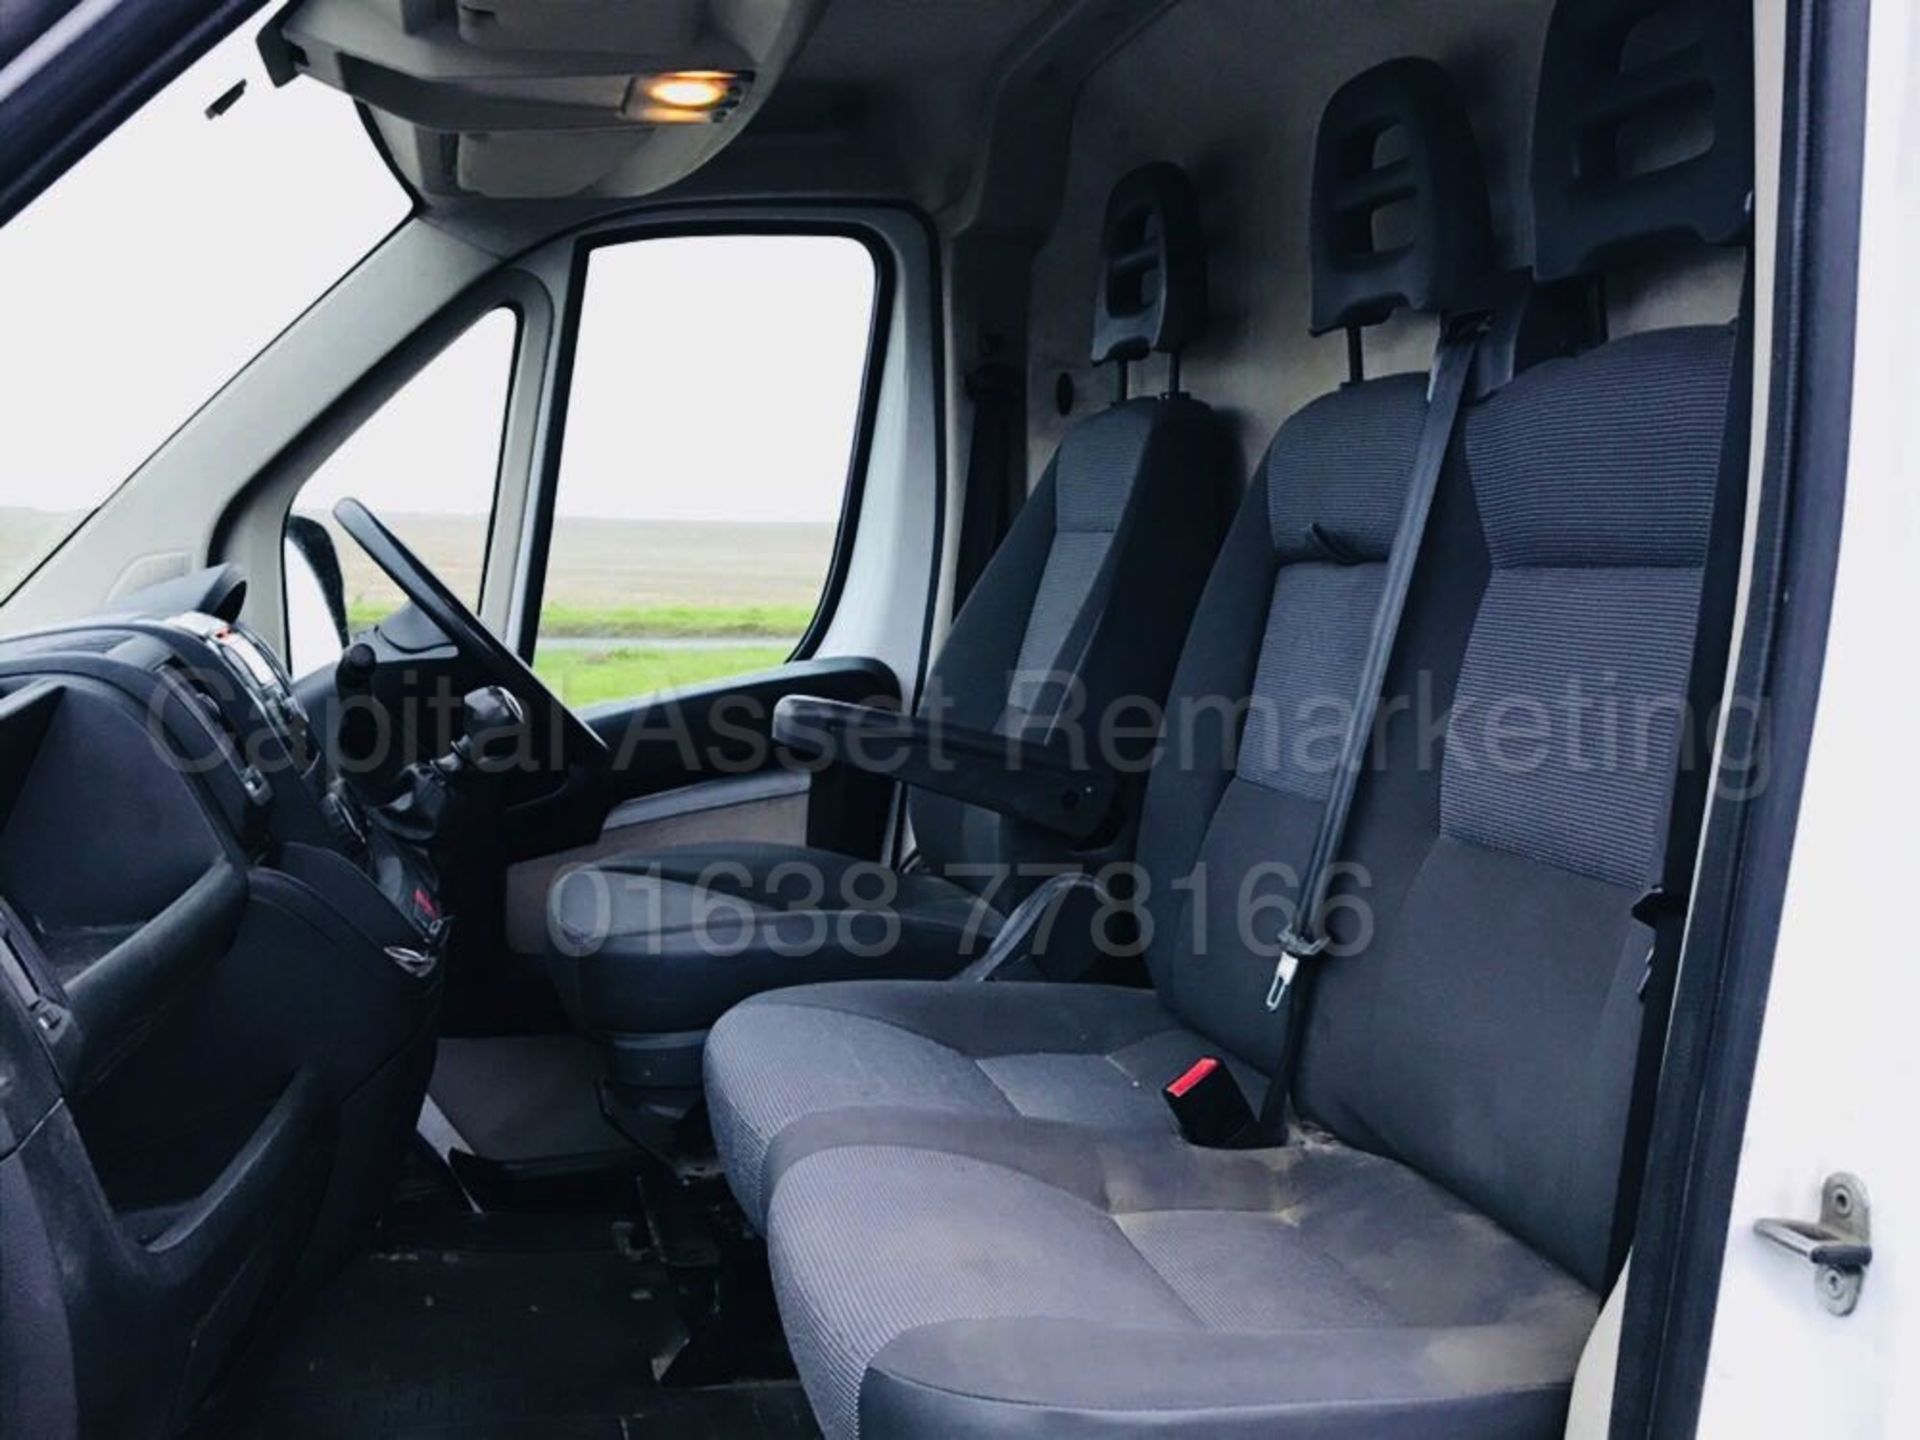 (On Sale) PEUGEOT BOXER 335 LWB HI-ROOF (2014) '2.2 HDI - 130 BHP- 6 SPEED' (1 OWNER - FULL HISTORY) - Image 11 of 19